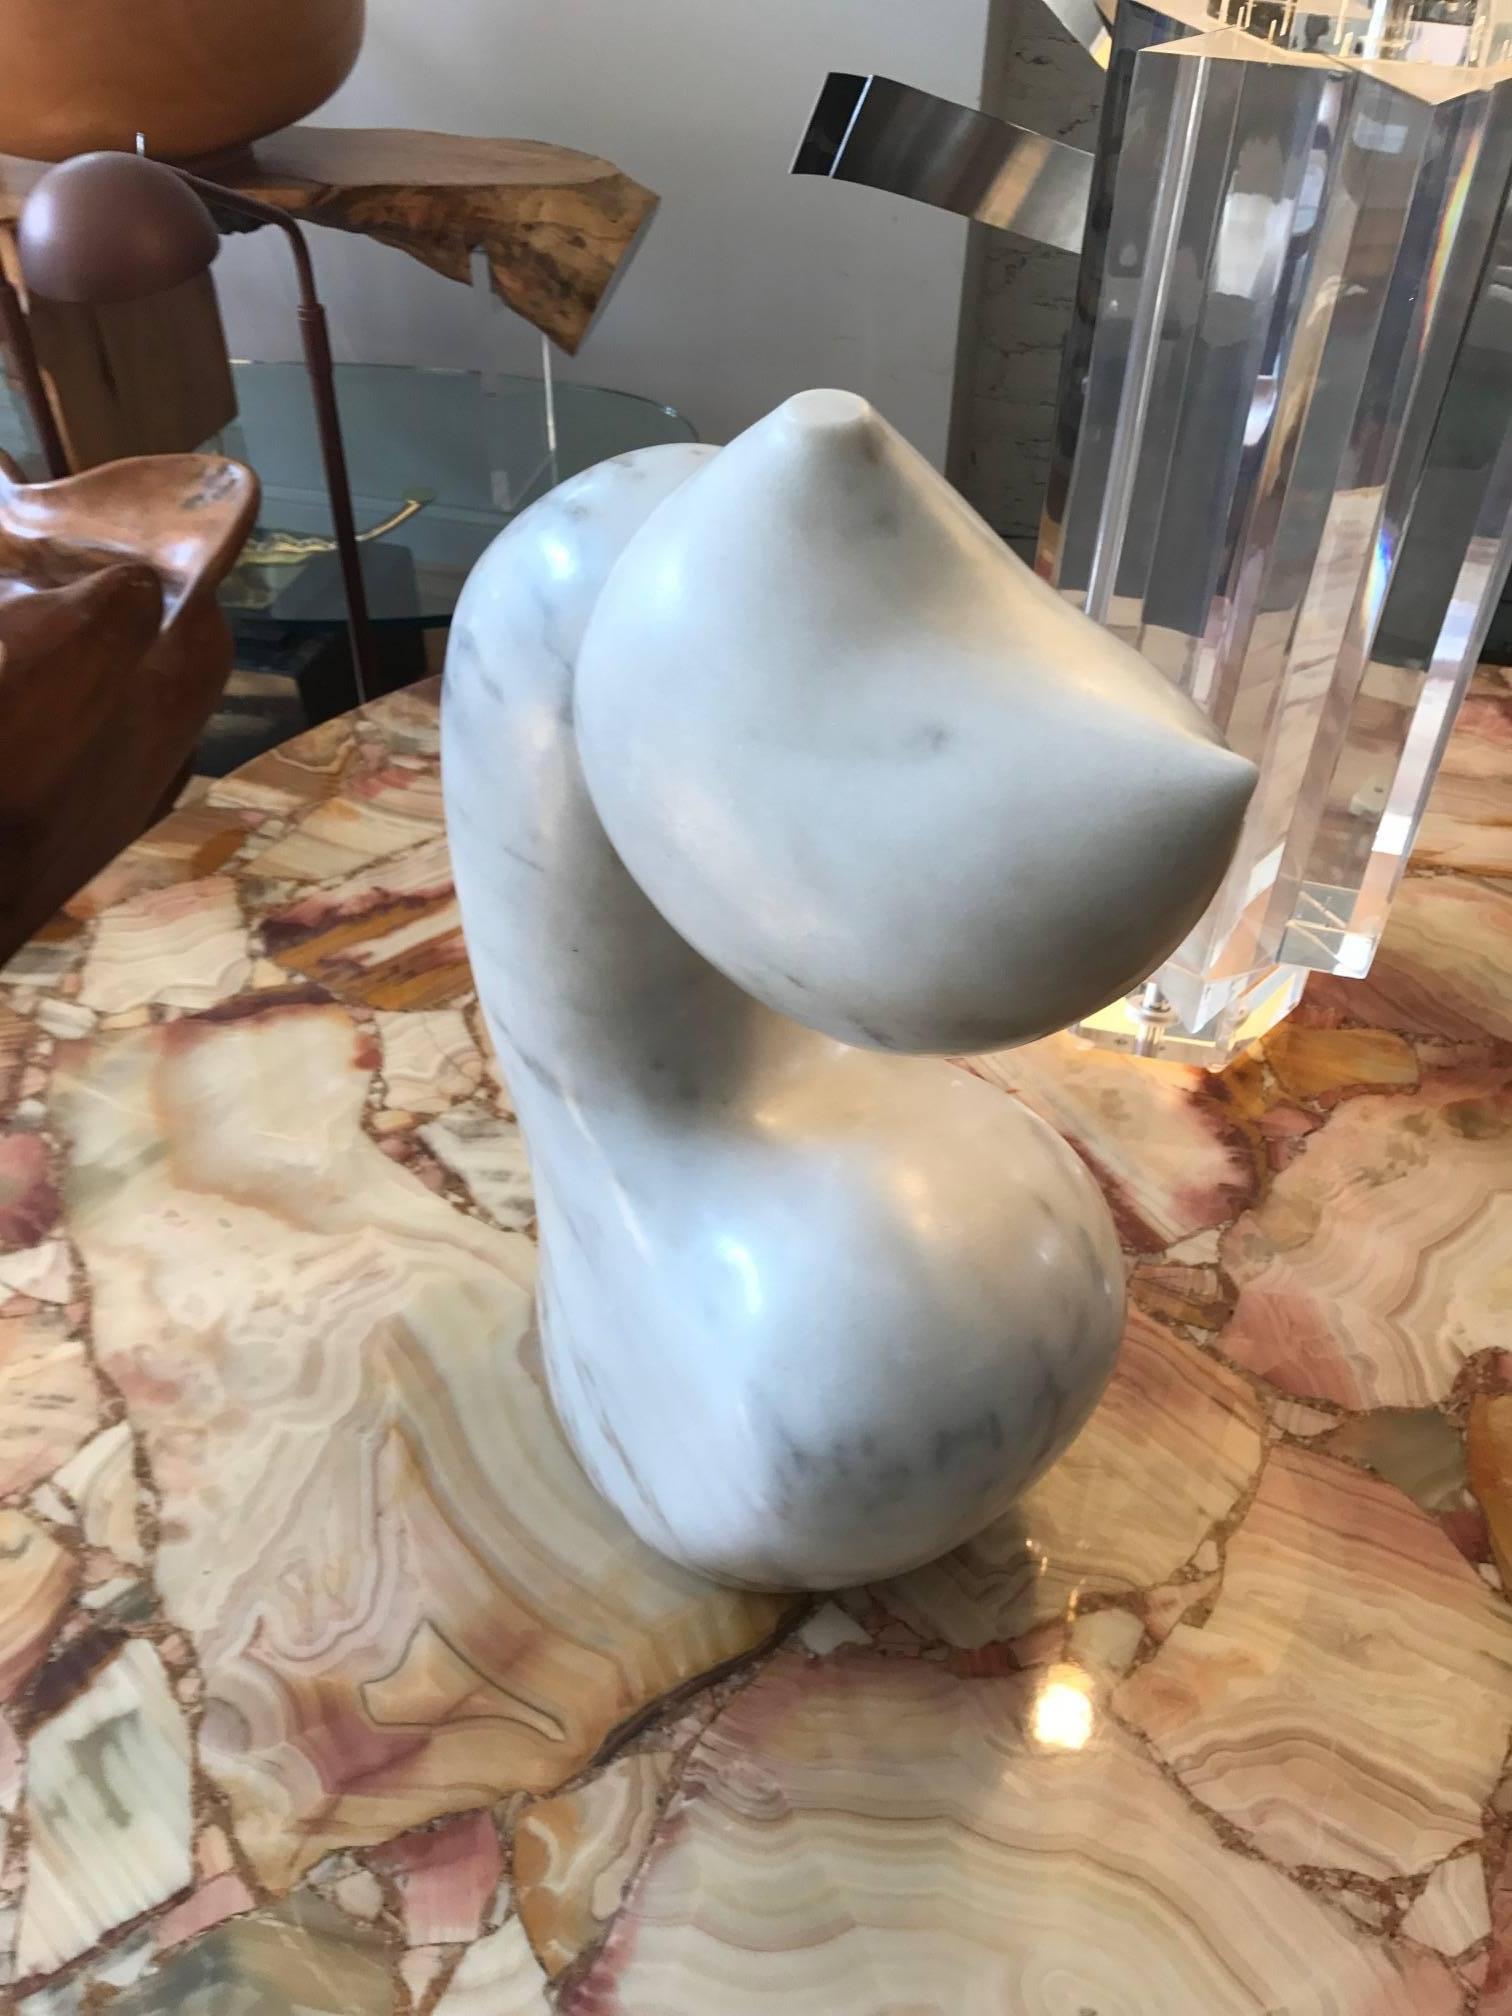 Abstract biomorphic marble sculpture by Mario DeNoto. The work is signed Denoto 64. The work is carved out of white Carrara marble with grey veining throughout. Very much in the style of the organic works Henry Moore and Barbara Hepworth. Intriguing